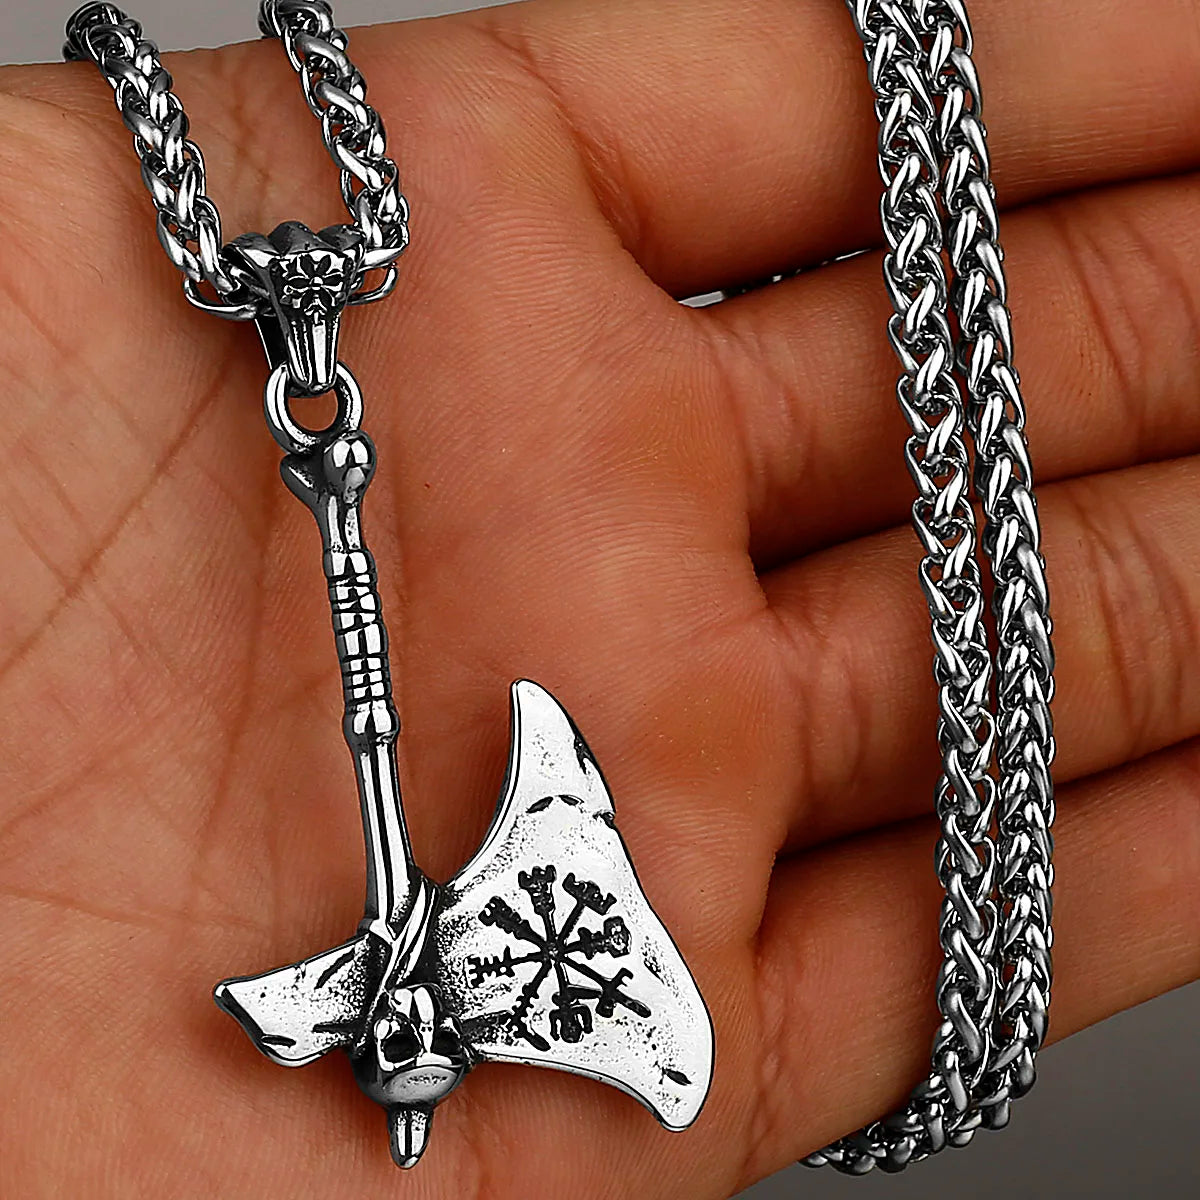 Viking Axe Necklace Pendant - Mythical Pieces Only Pendant / WJ 74